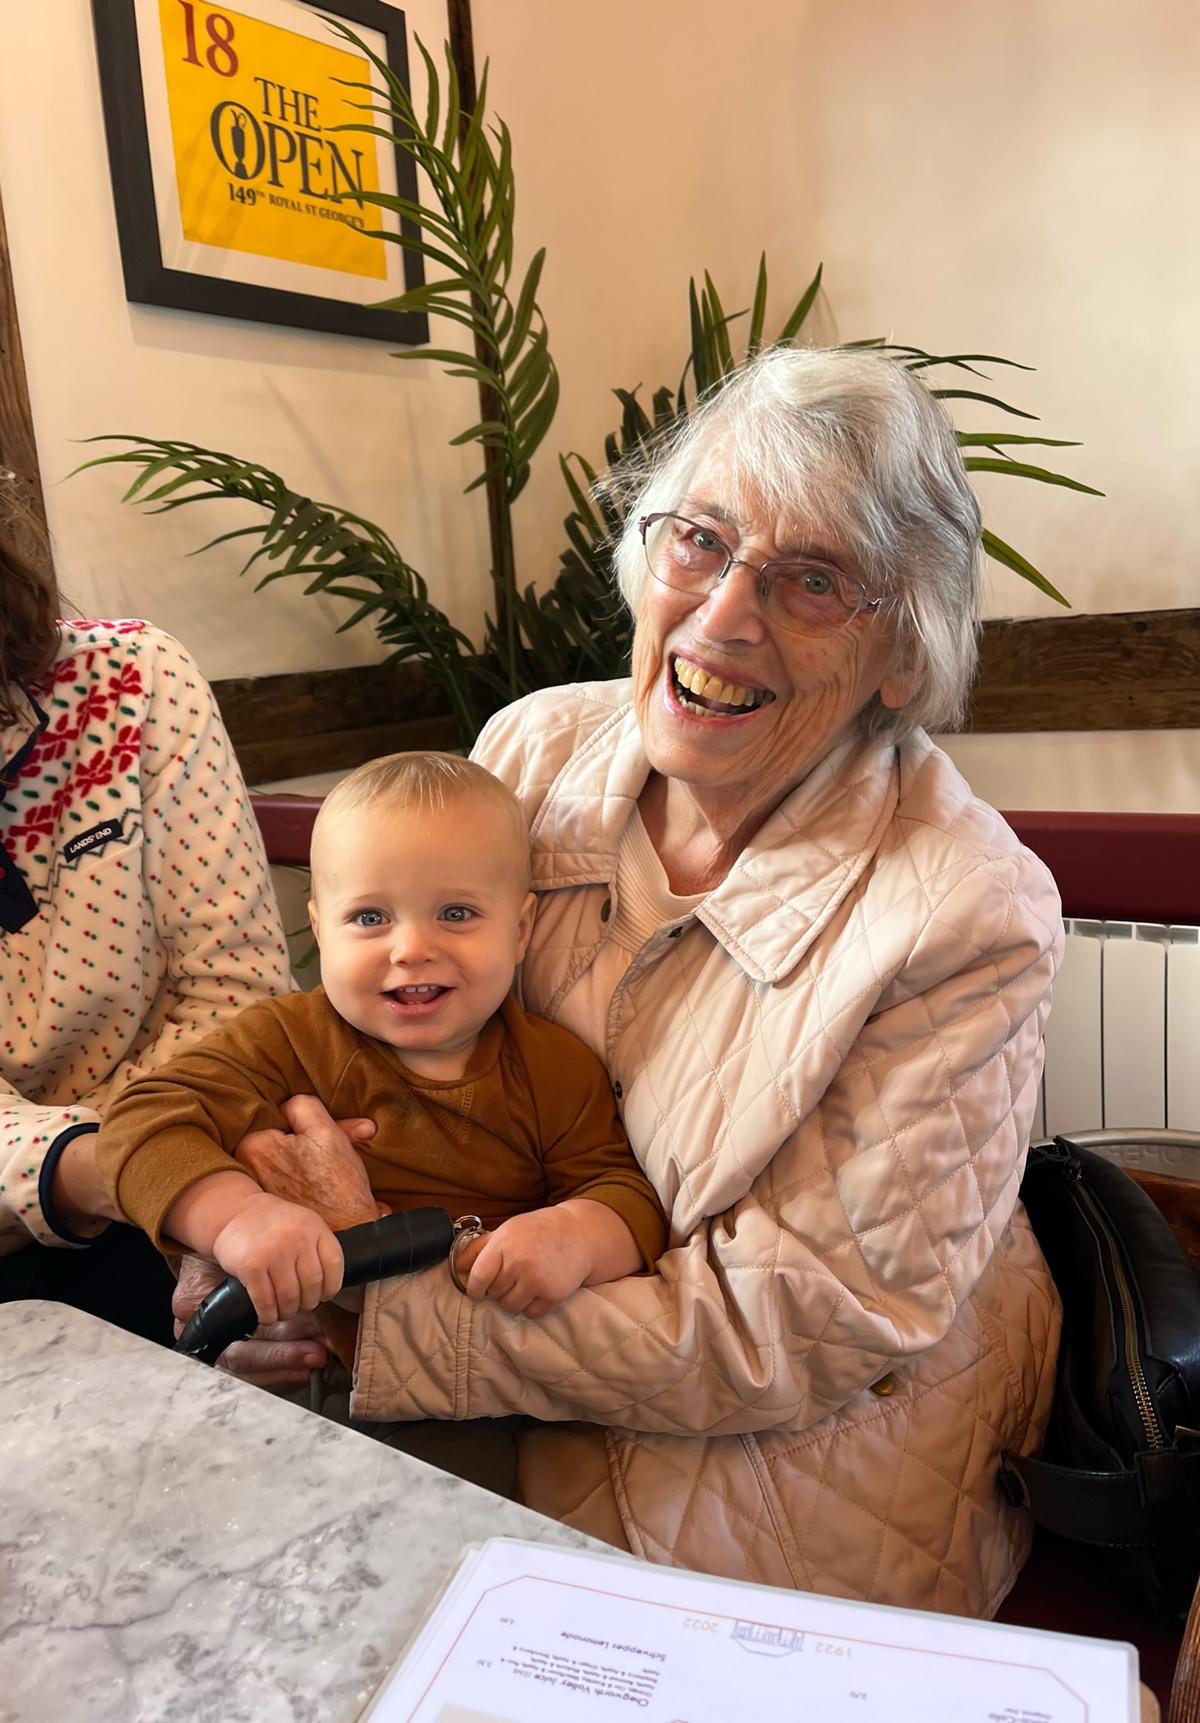 The author's grandma, Audrey Genders, with the author's youngest child, Jack. (Rachael Dymski)